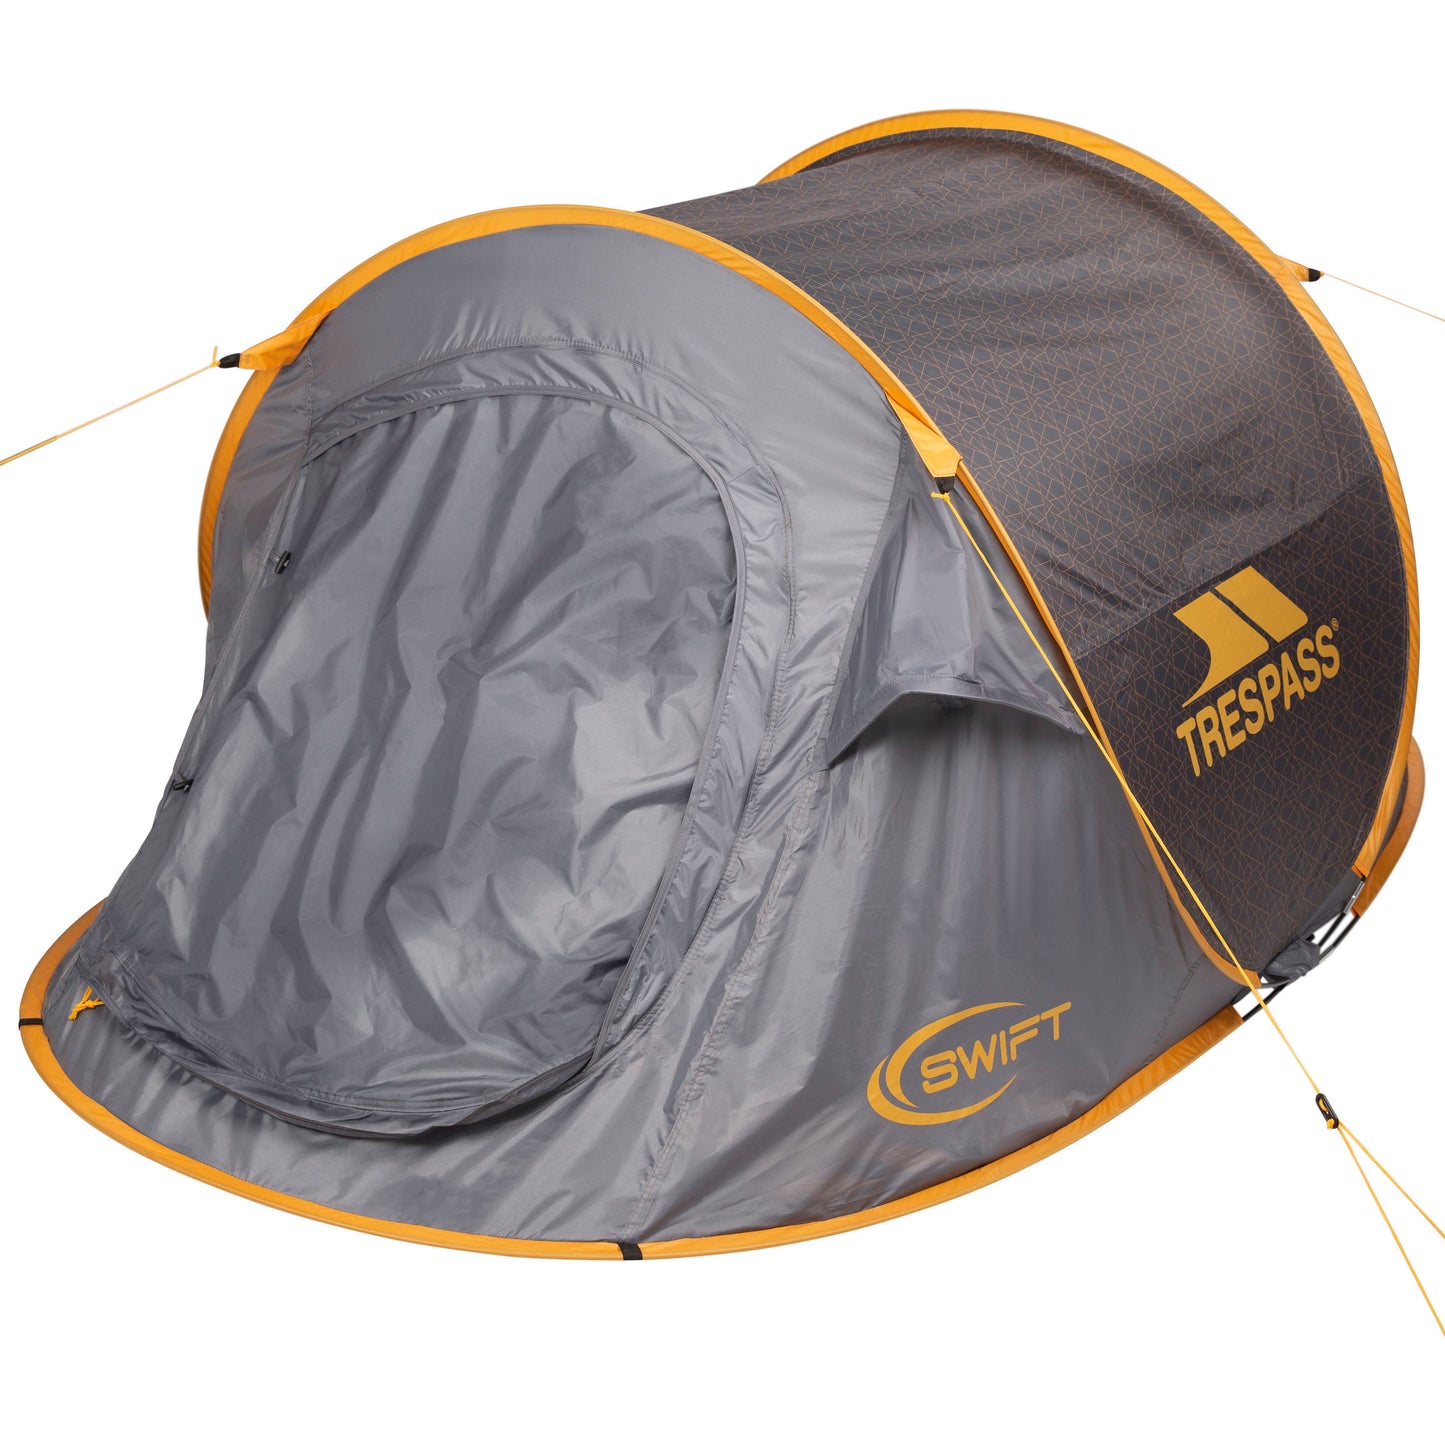 Swift 2 Patterned Pop-Up Tent in Storm Grey Print